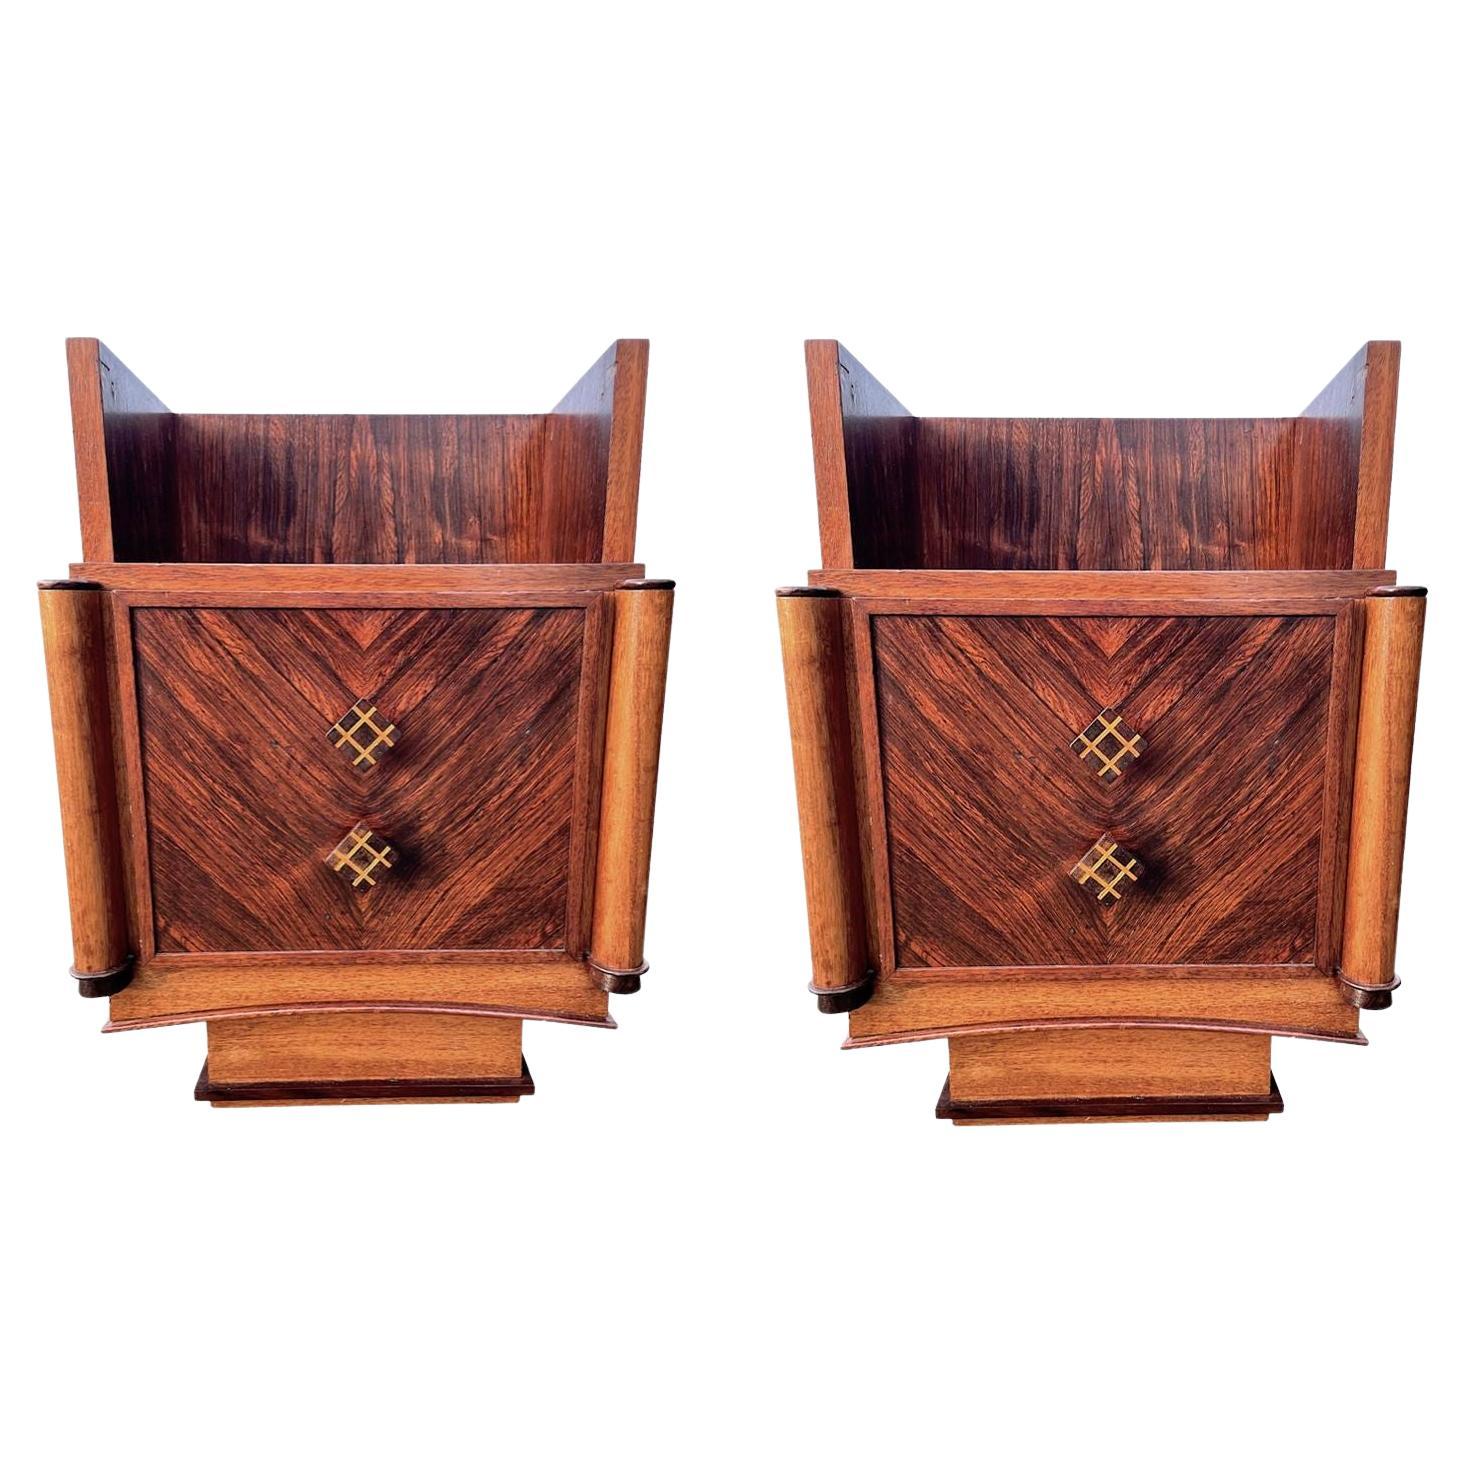 Pair of 1930s Art Deco Walnut Bedside Table with Marquetry Detail For Sale